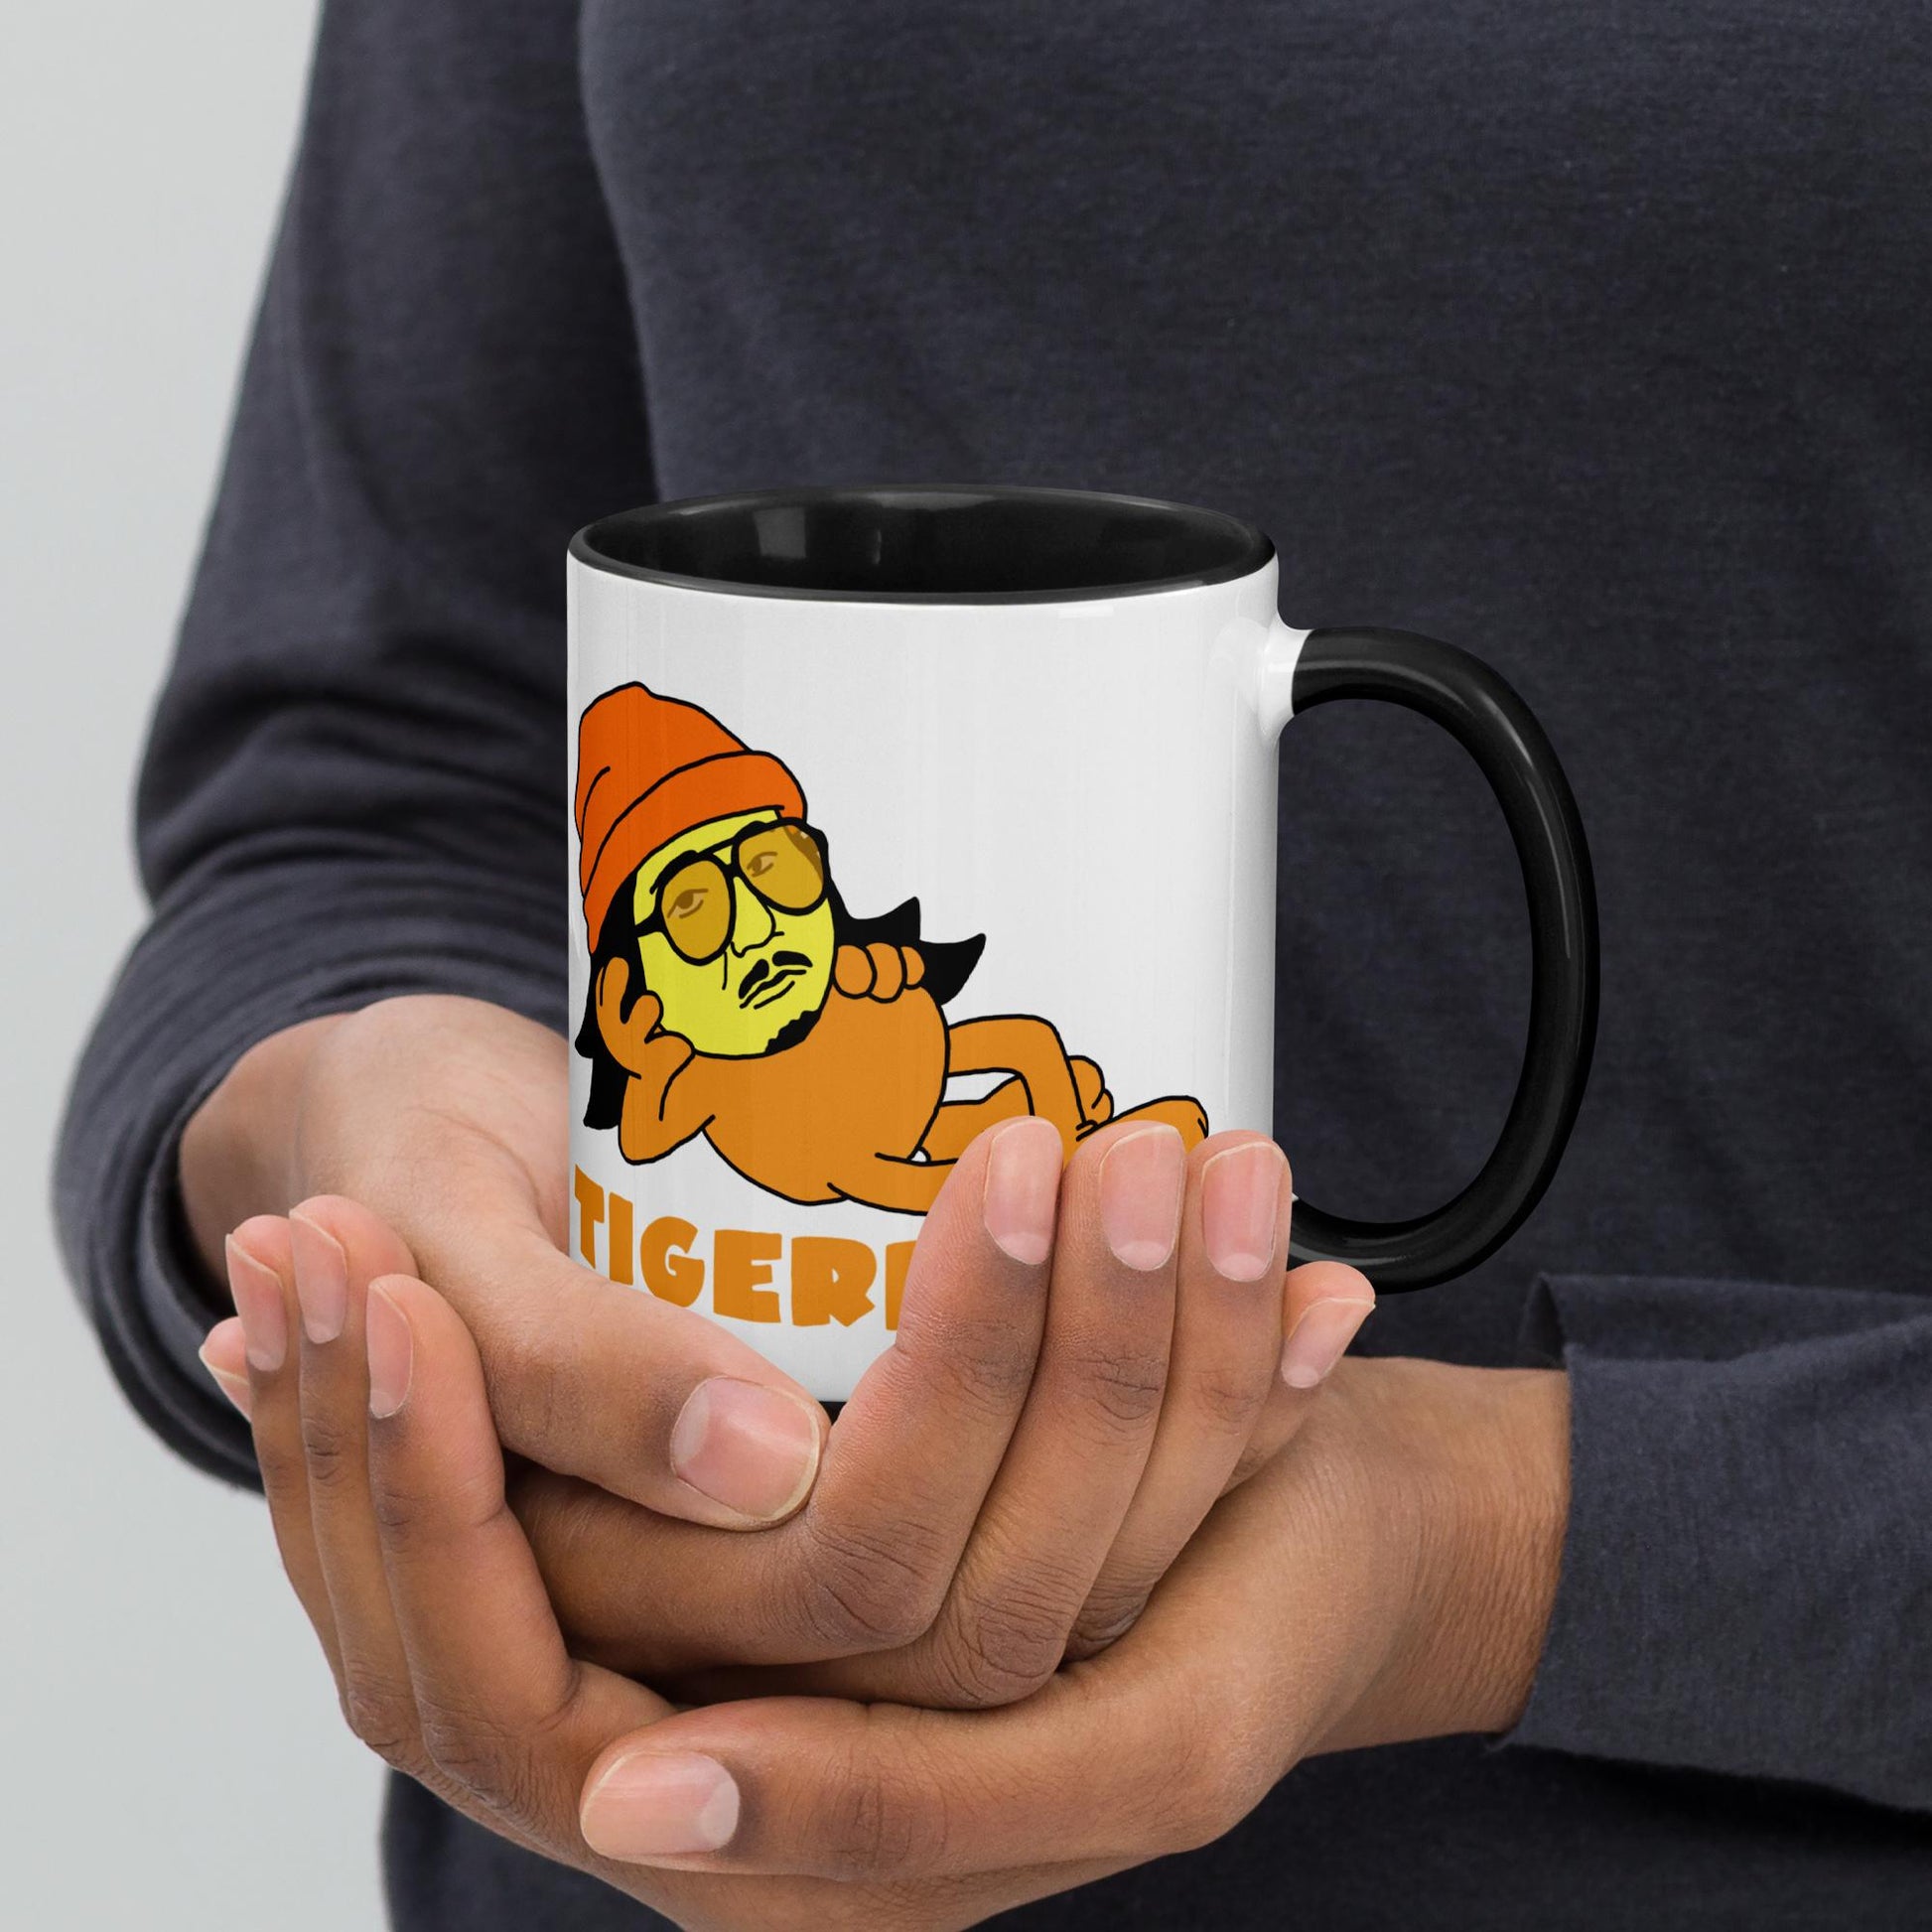 Bobby Lee Tigerbelly, Bobby Lee Merch, Tigerbelly Merch, Bobby Lee Gift, Funny Tigerbelly Gift, Tigerbelly Podcast, TigerBelly Mug with Color Inside Next Cult Brand Bobby Lee, Podcasts, Stand-up Comedy, TigerBelly